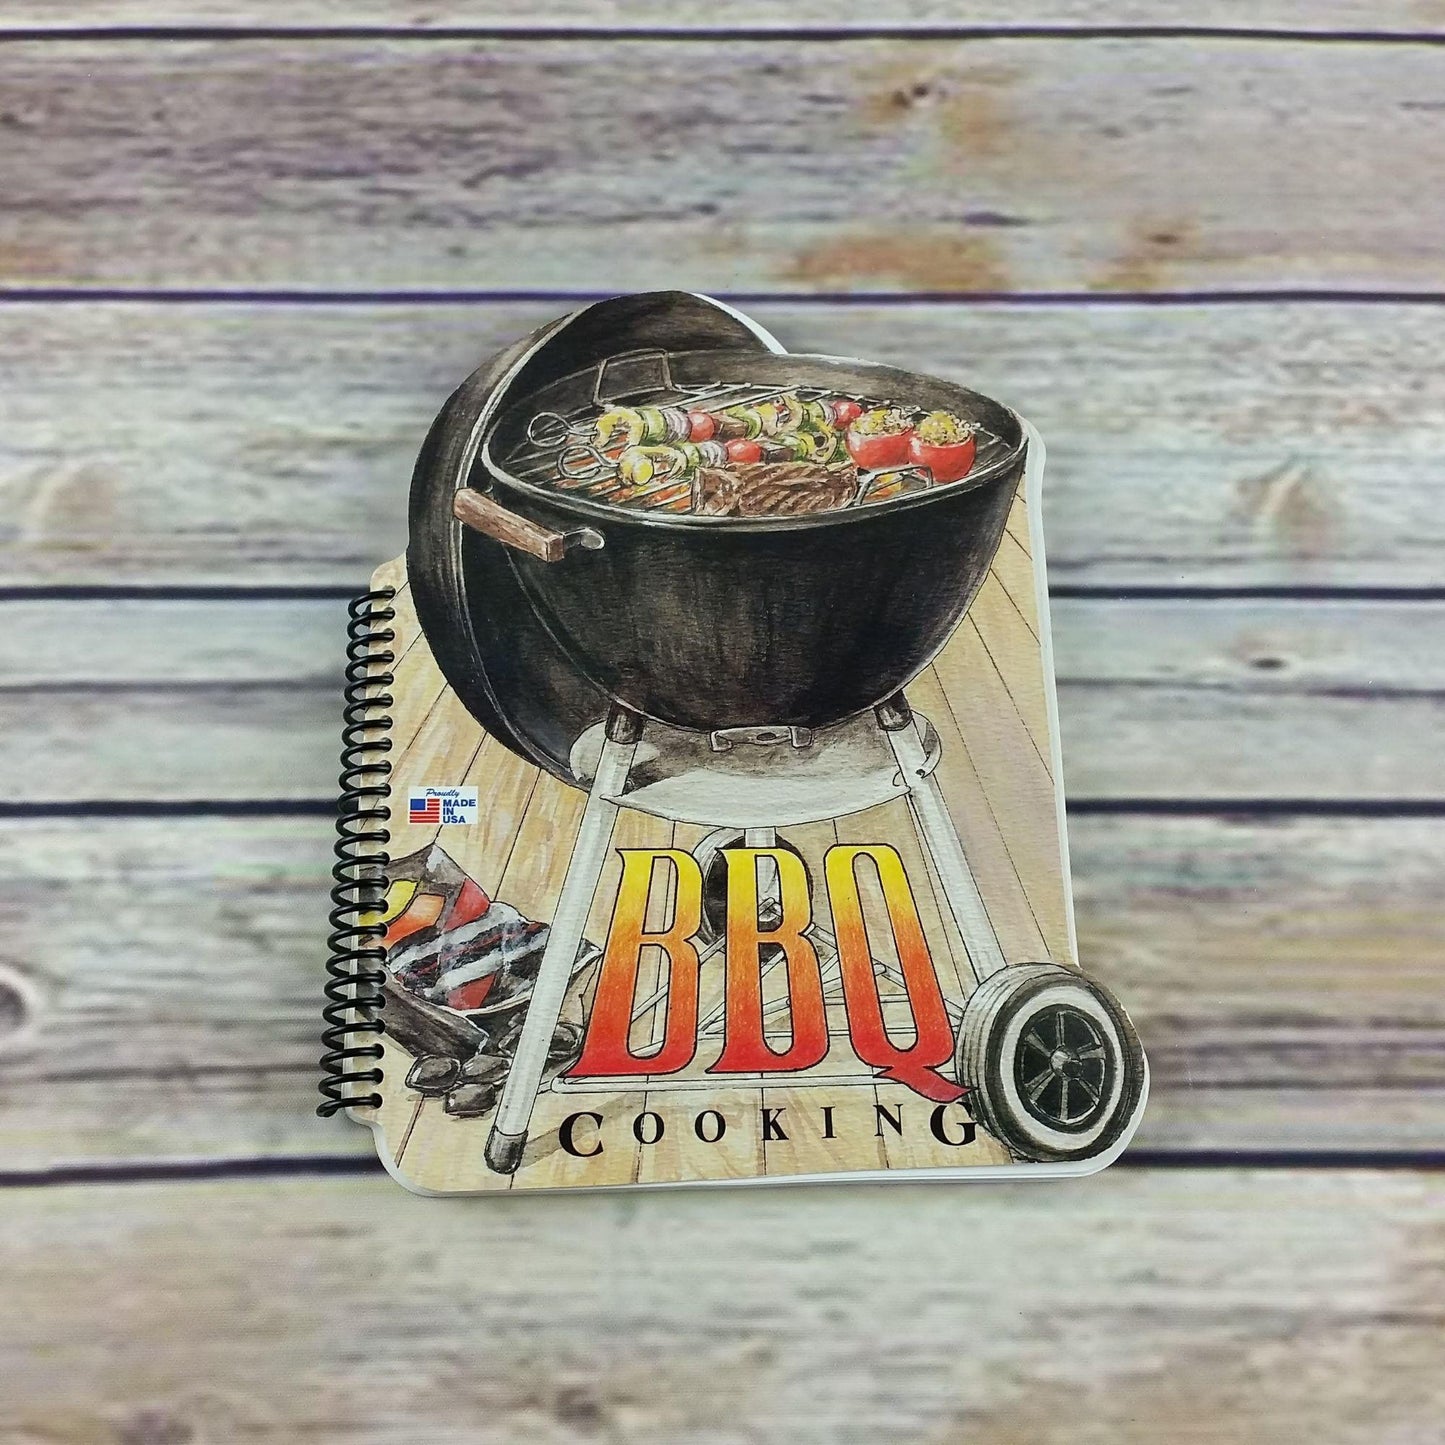 Vintage Cookbook BBQ Cooking John Farris Private Collection Recipes 1992 Spiral